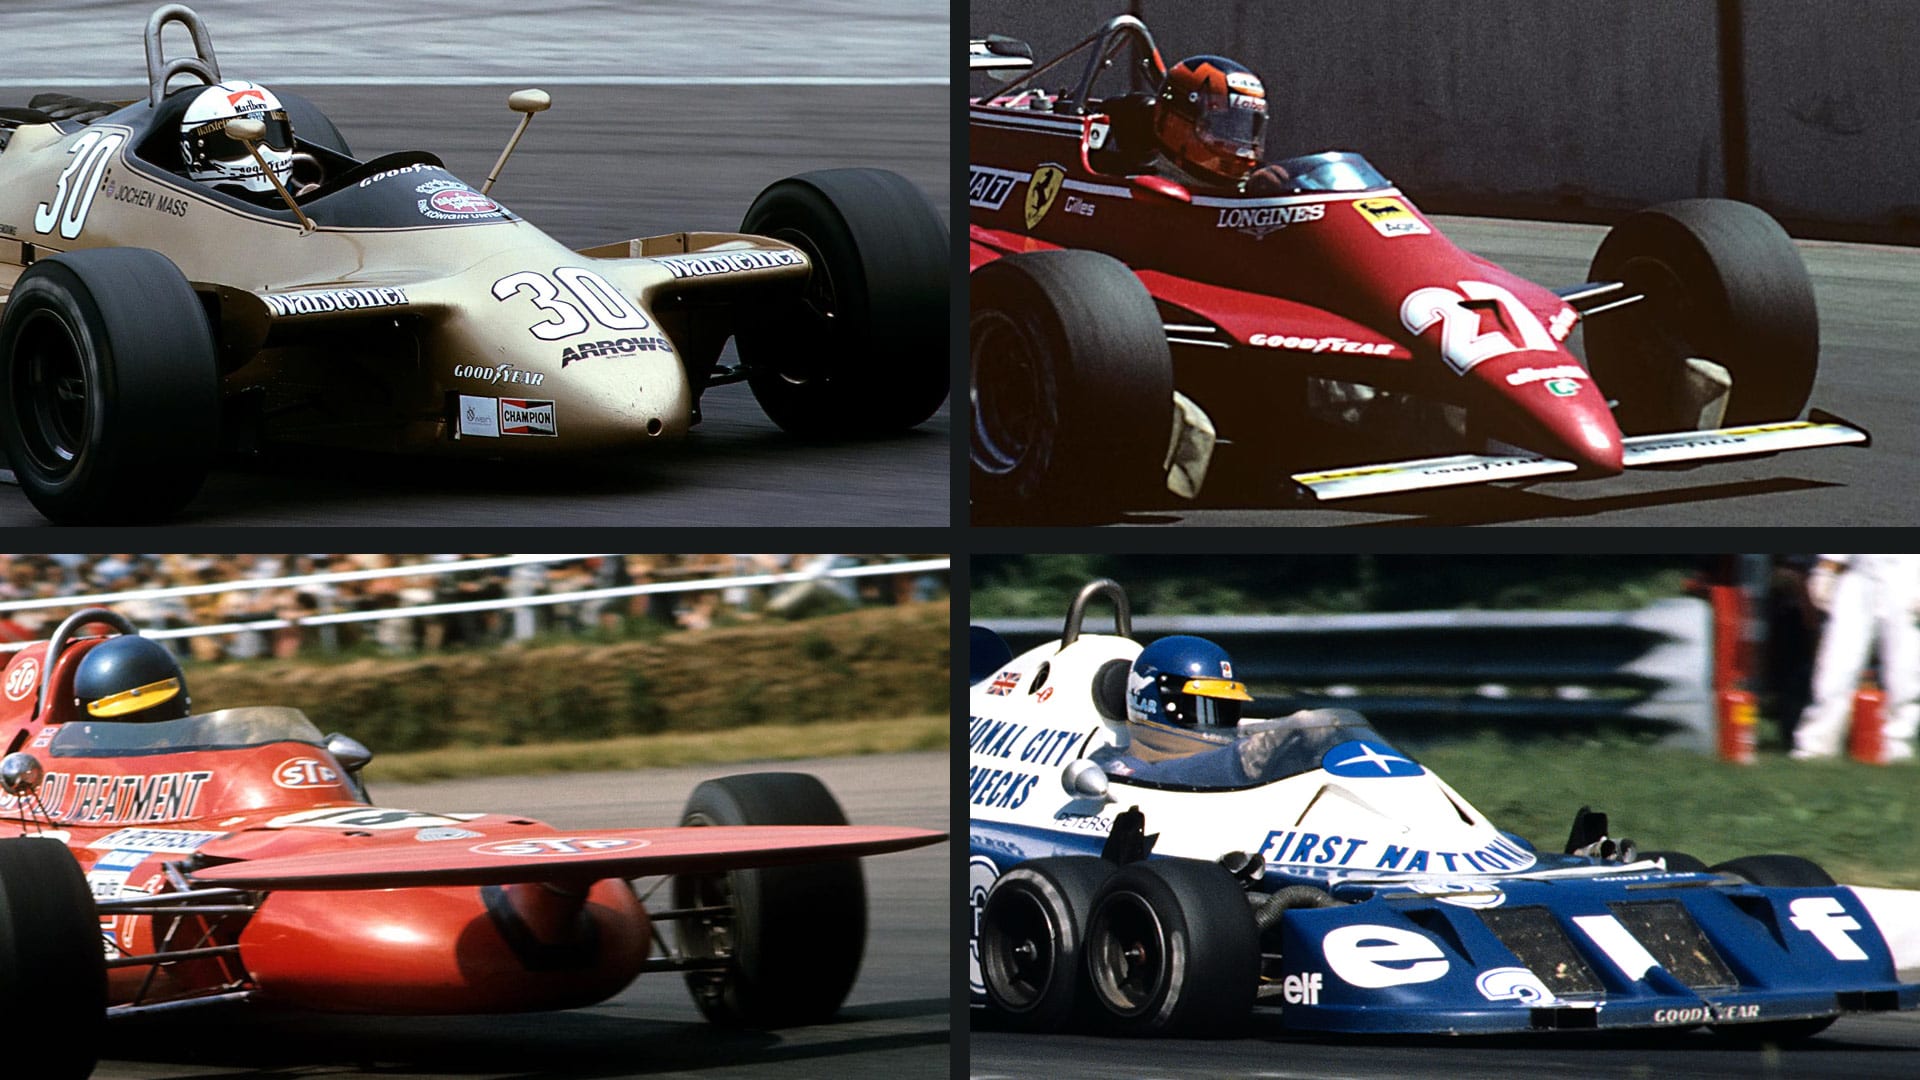 From the six wheeled Tyrrell to the dual rear-wing Ferrari